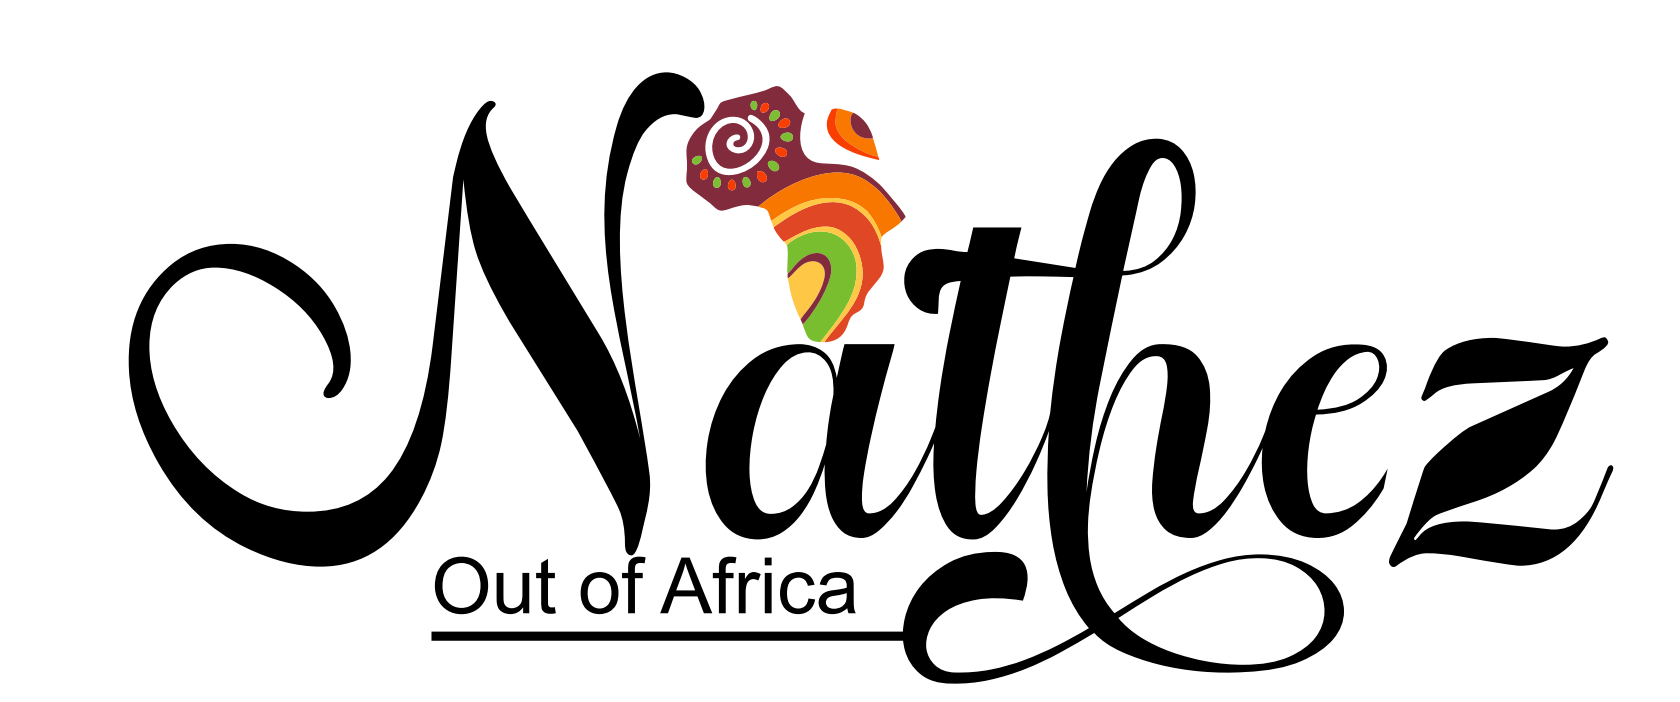 Nathez out of Africa